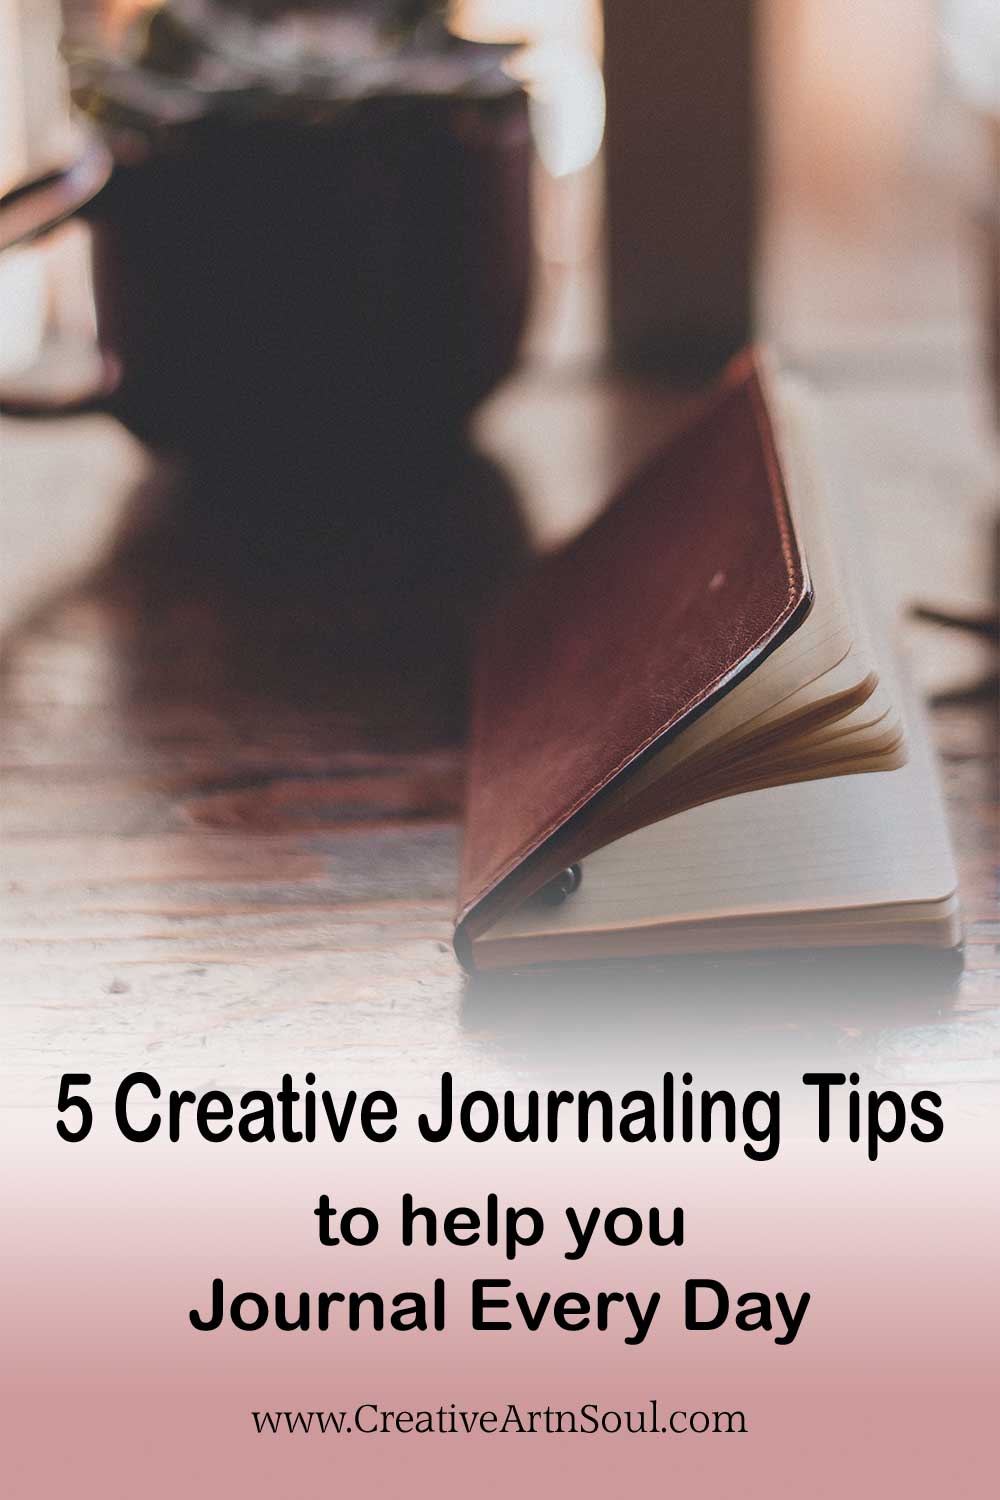 5 Simple Journaling Tips to Help you Journal Every Day